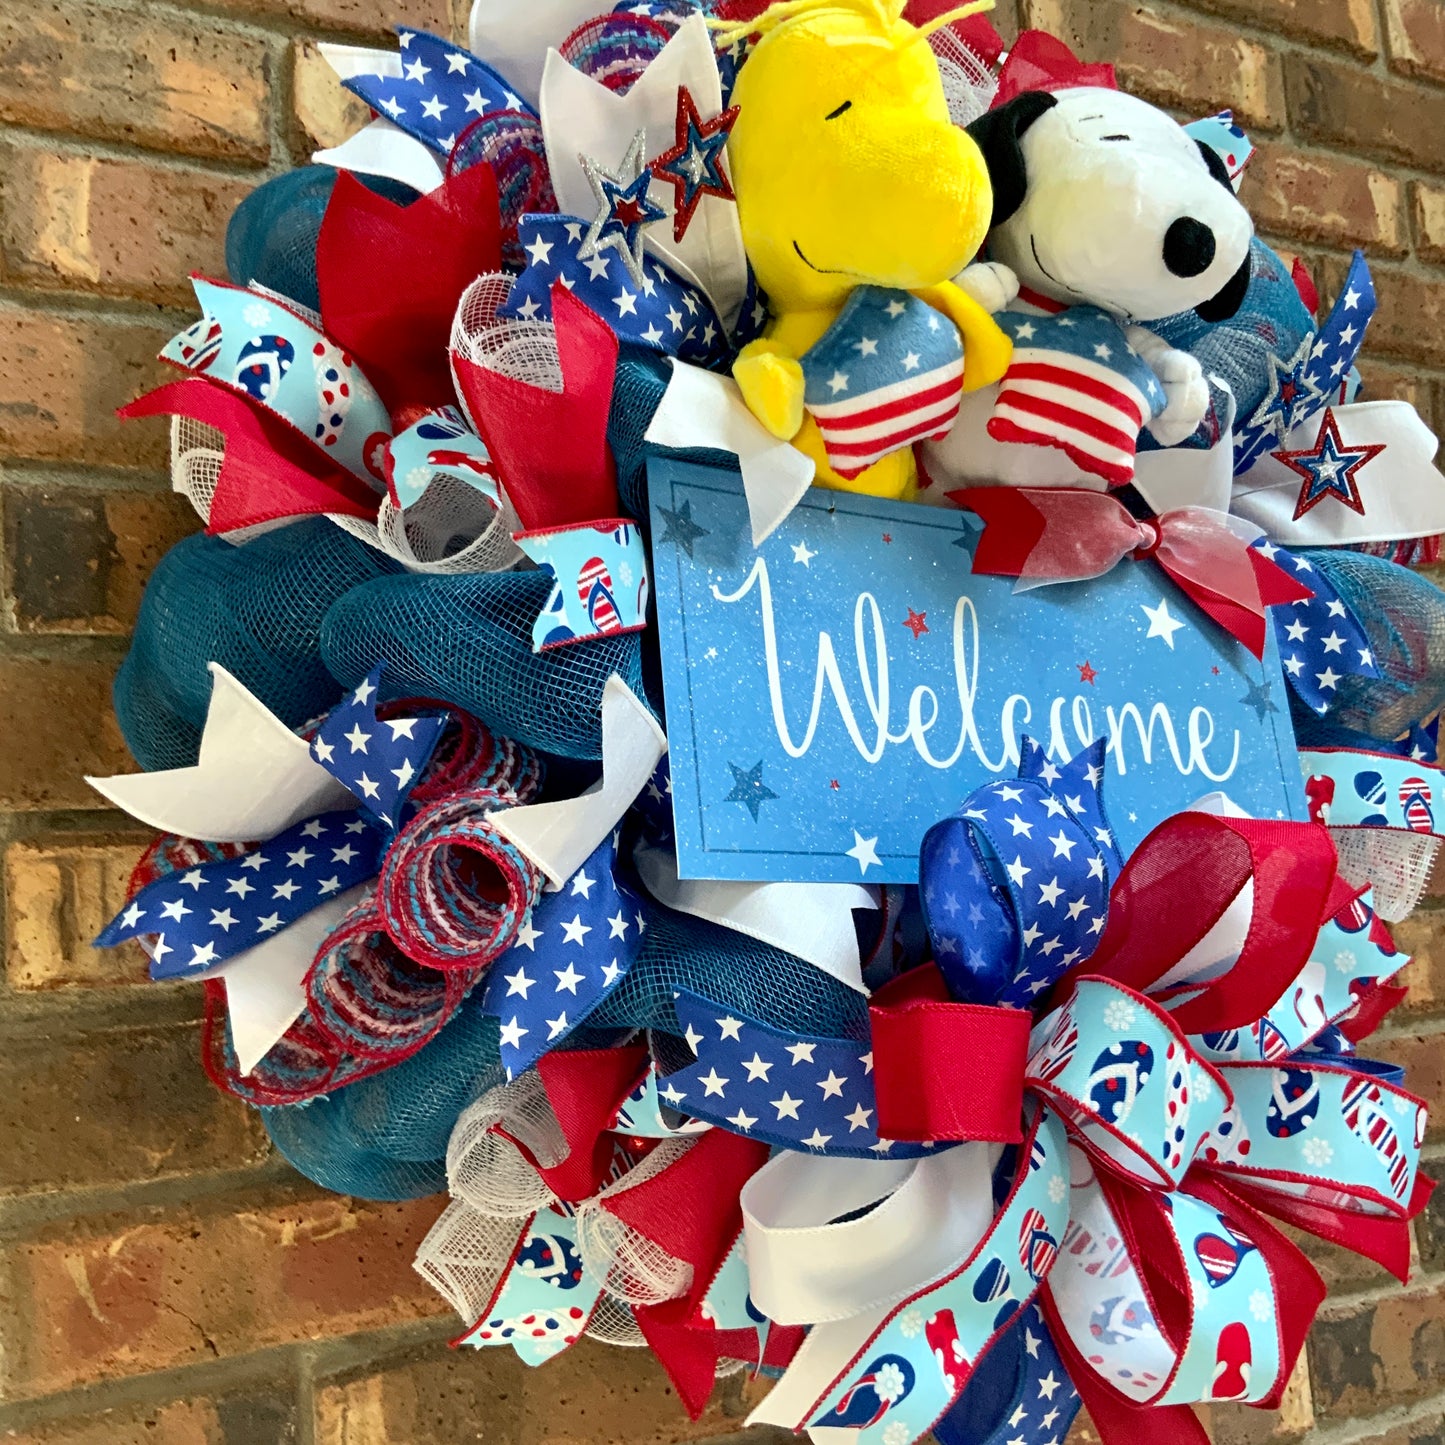 Snoopy Patriotic Wreath, Snoopy Door Hanger, Snoopy and Woodstock Decor, Snoopy Wreath For Front Door, Fourth of July Wreath, Memorial Day Wreath